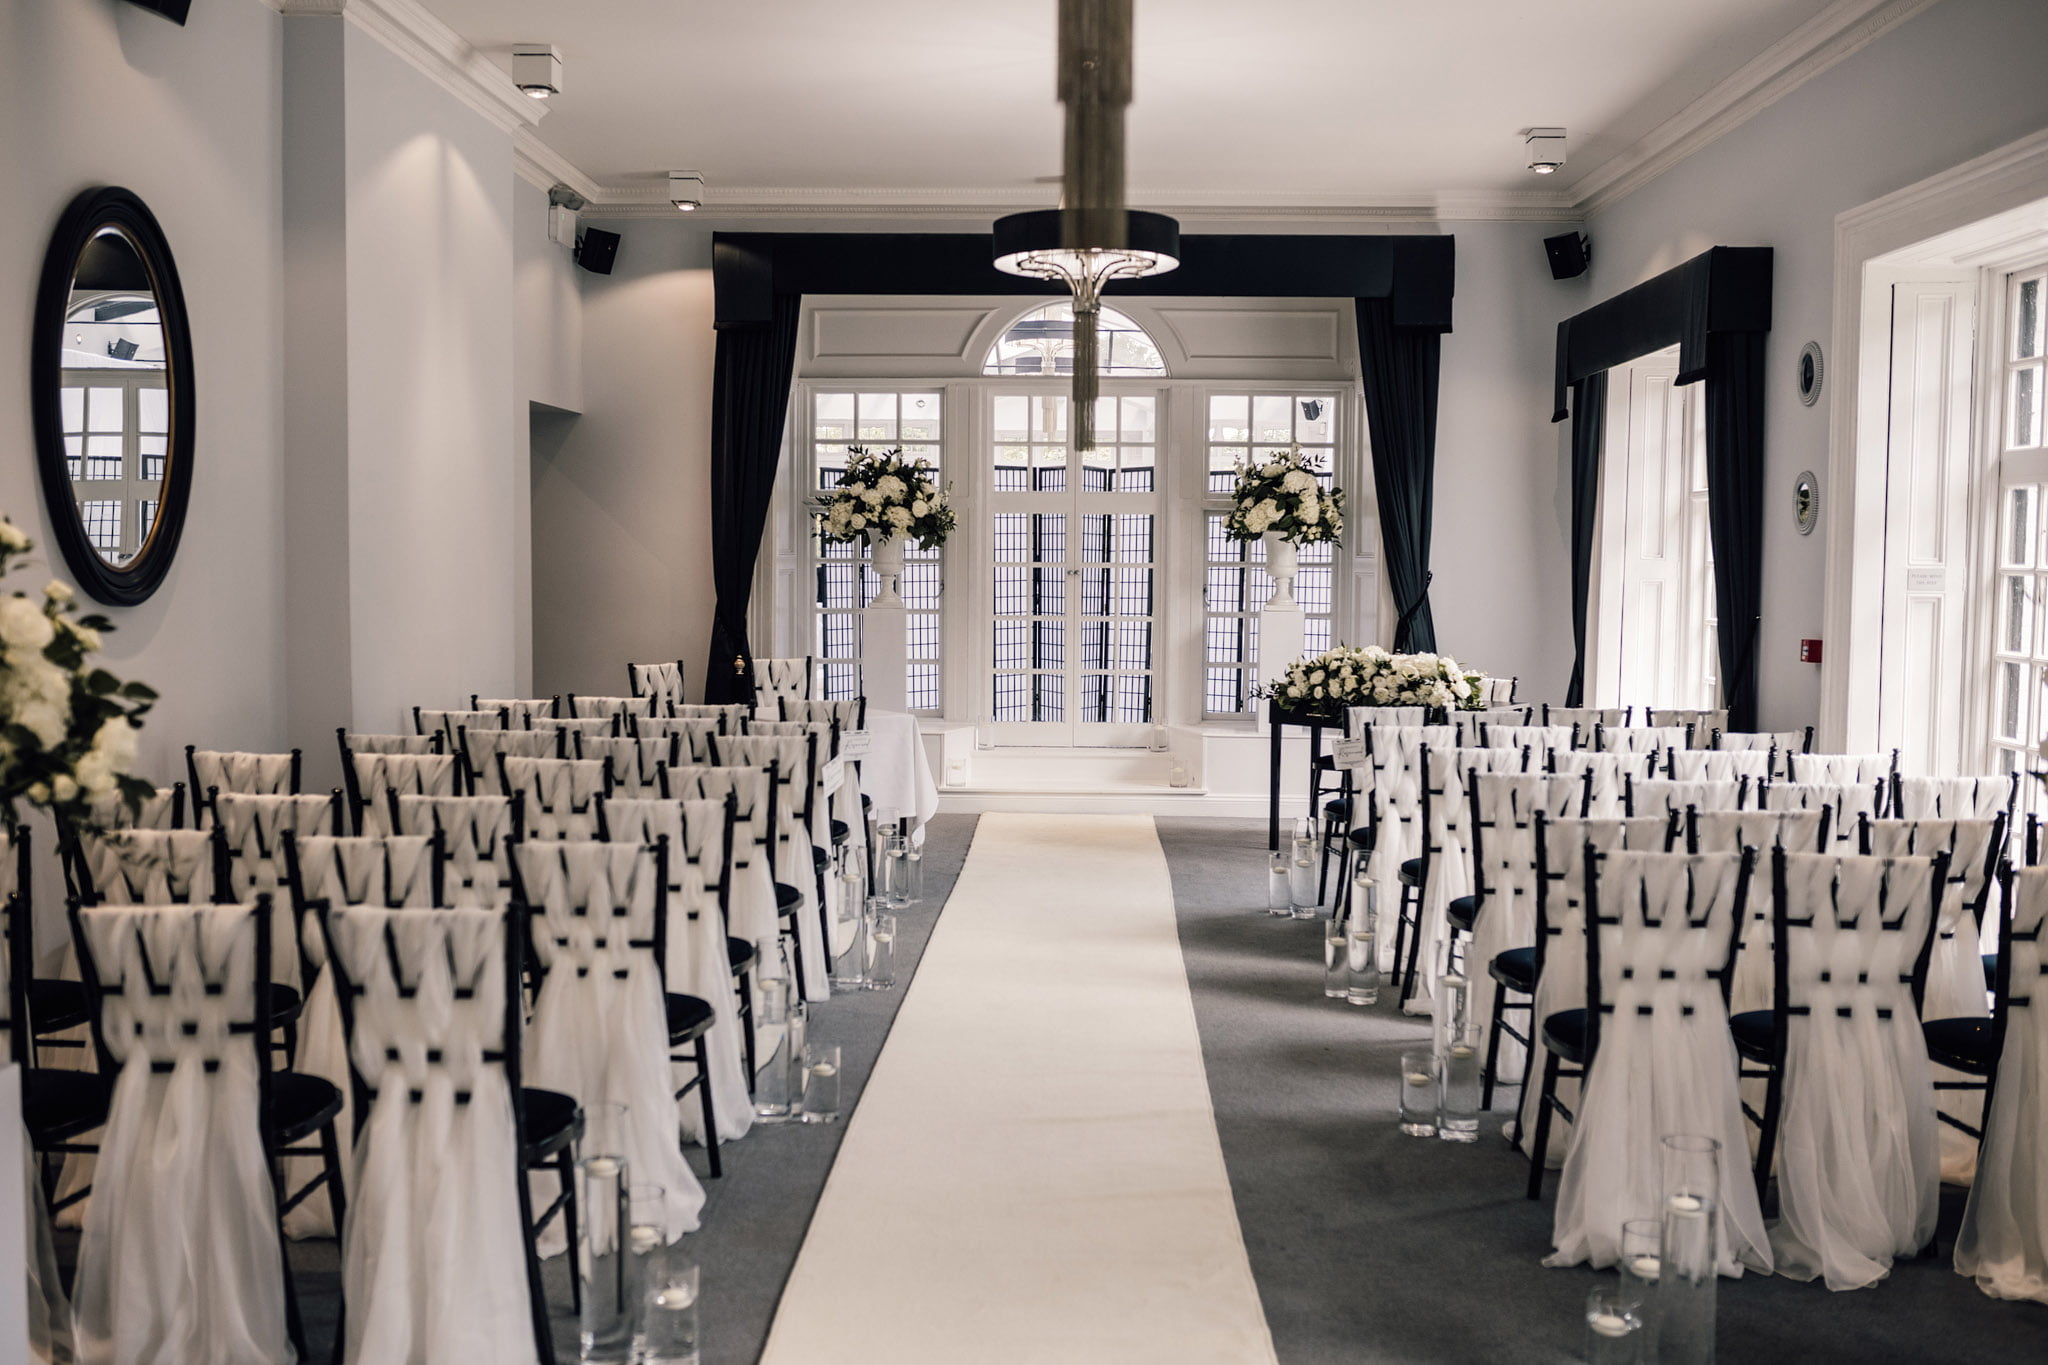 Ceremony setup in the Study at Swynford Manor with black chiavari chairs dressed with white voile facing french windows framed by black curtains and large white floral decorations